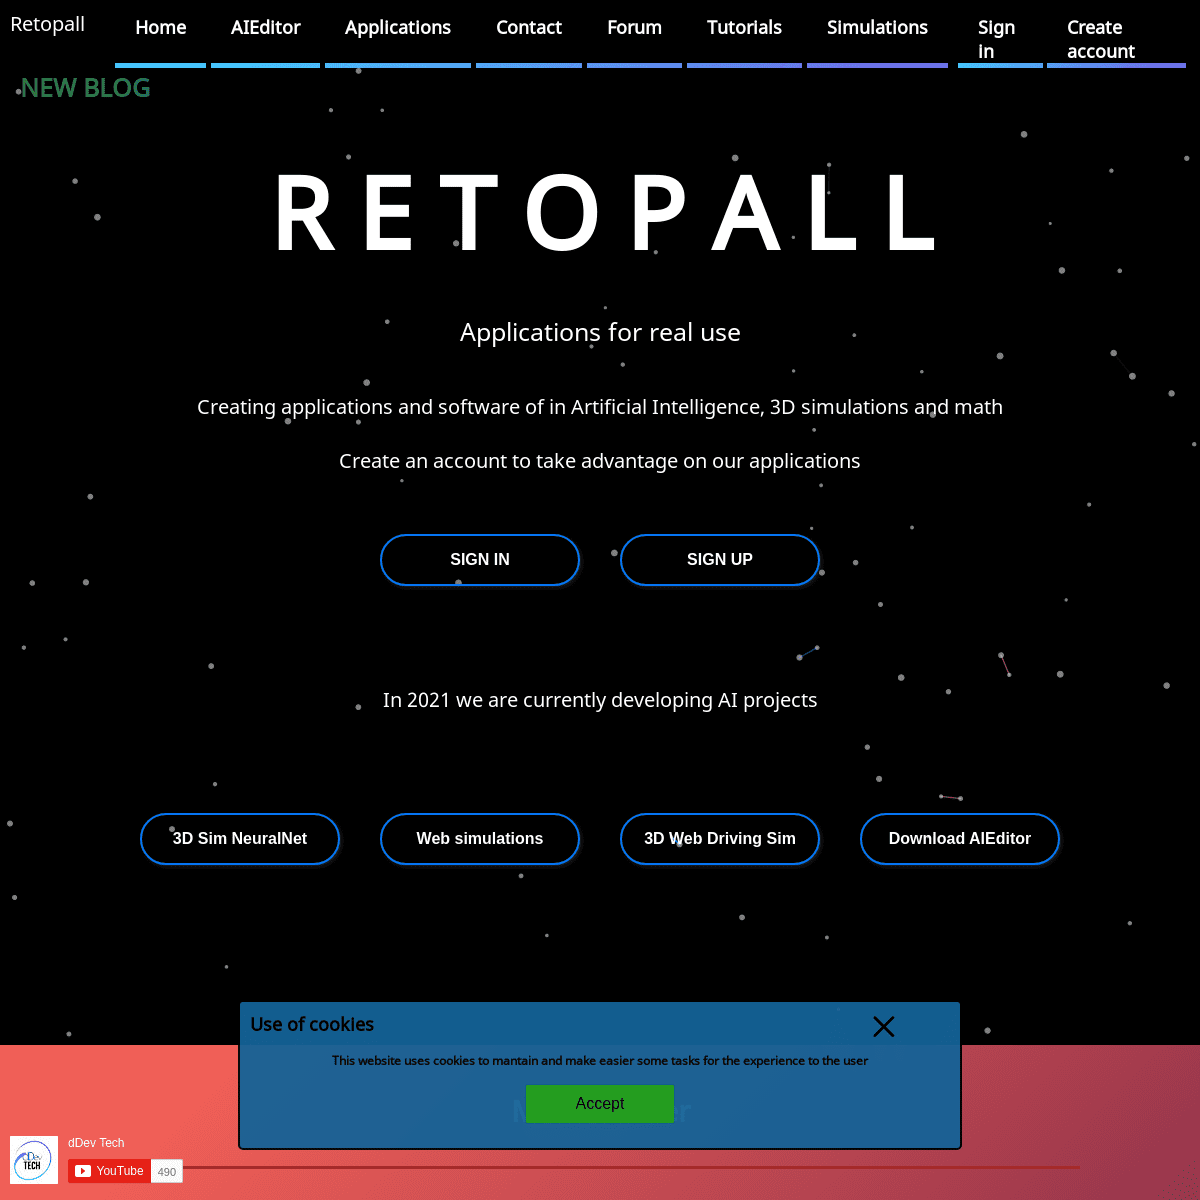 A complete backup of https://retopall.com